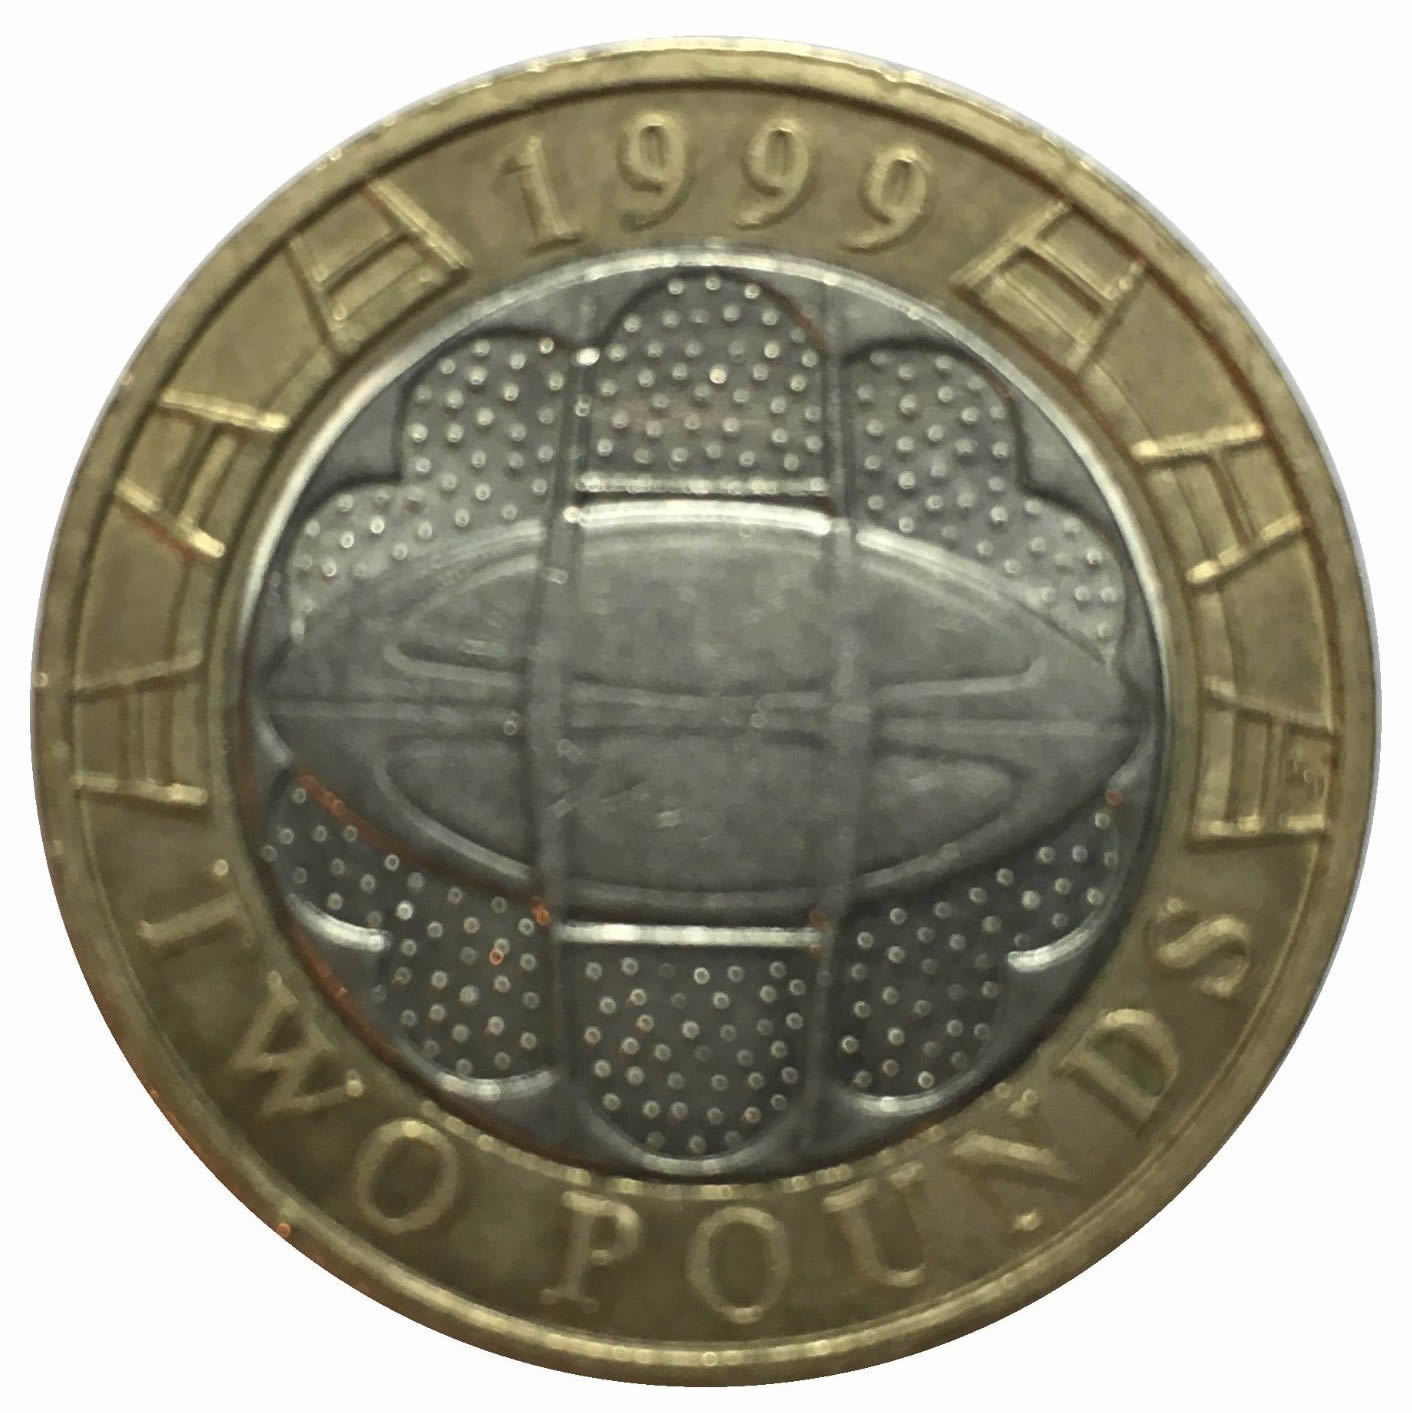 1999 Two Pounds Coin